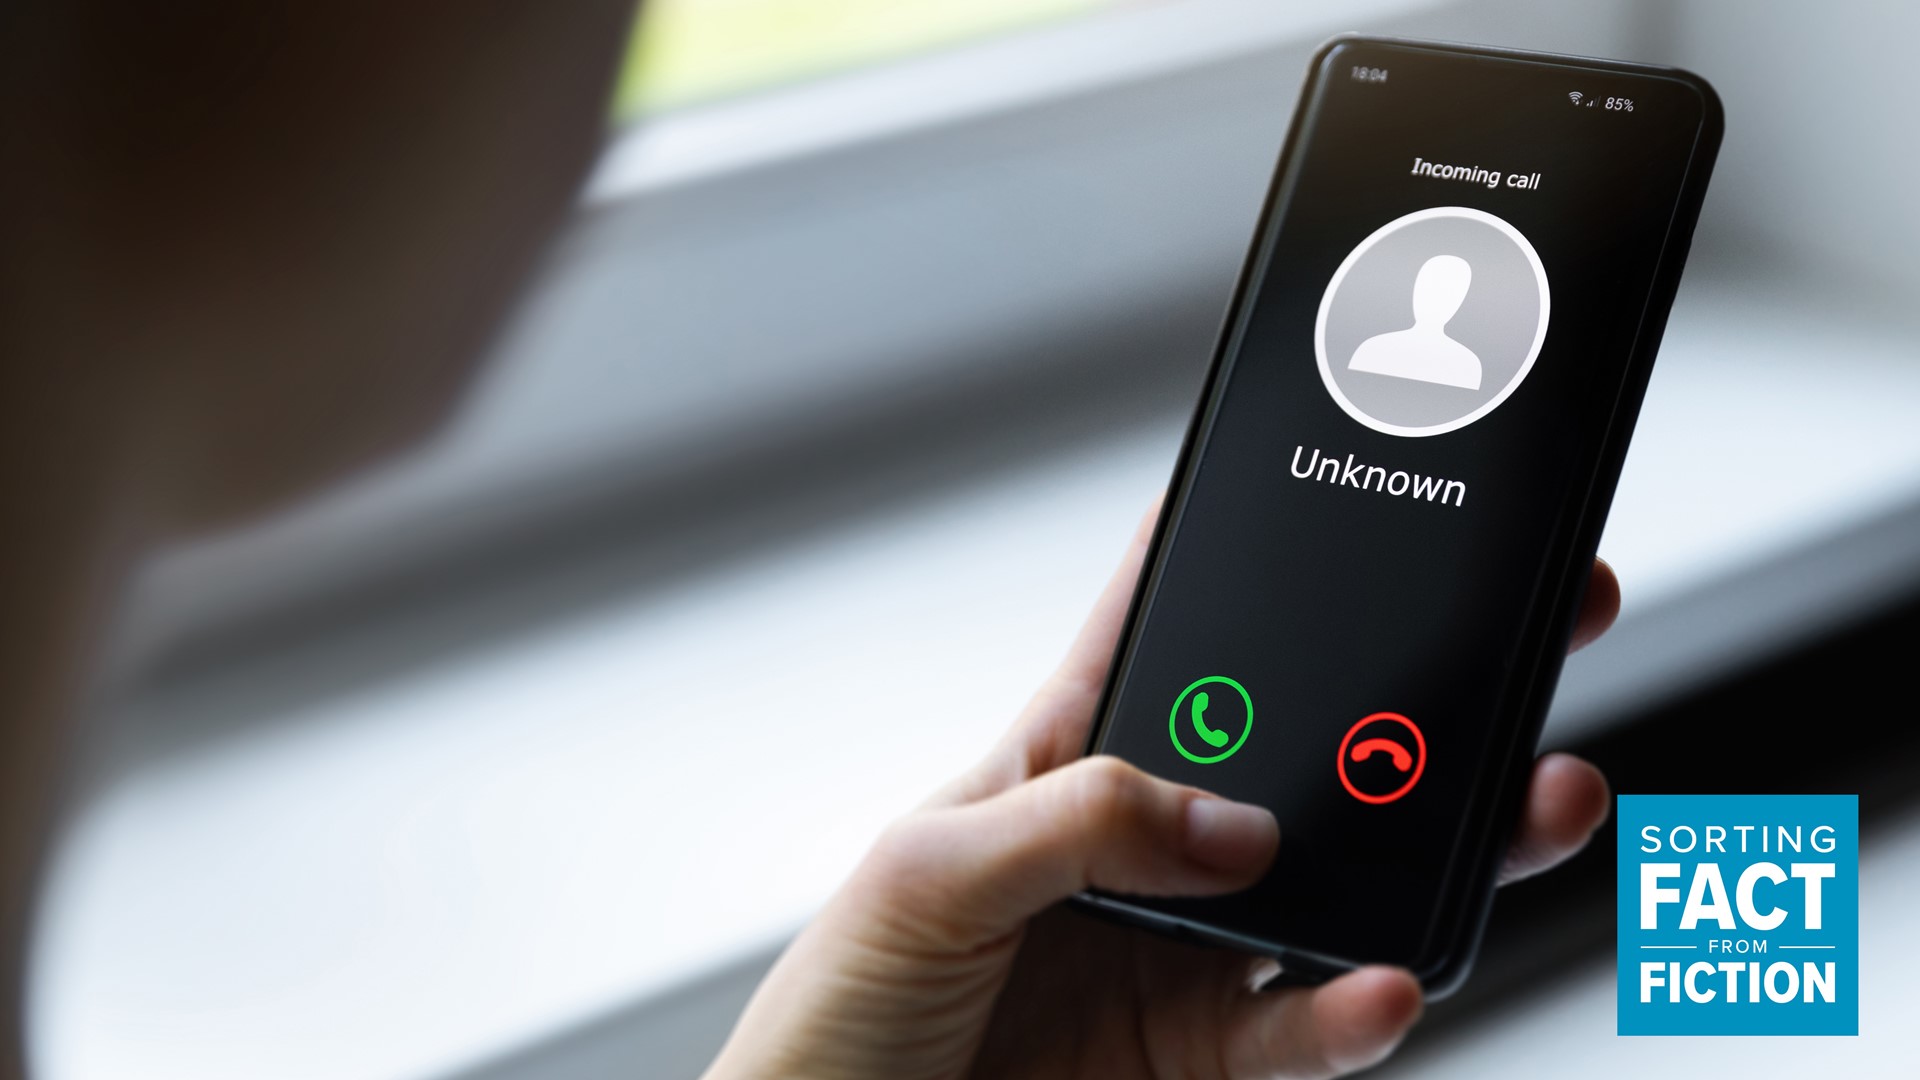 Many types of robocalls are created as a fraud scheme, but there are steps you can take to identify and avoid them. Sponsored by AARP Washington.